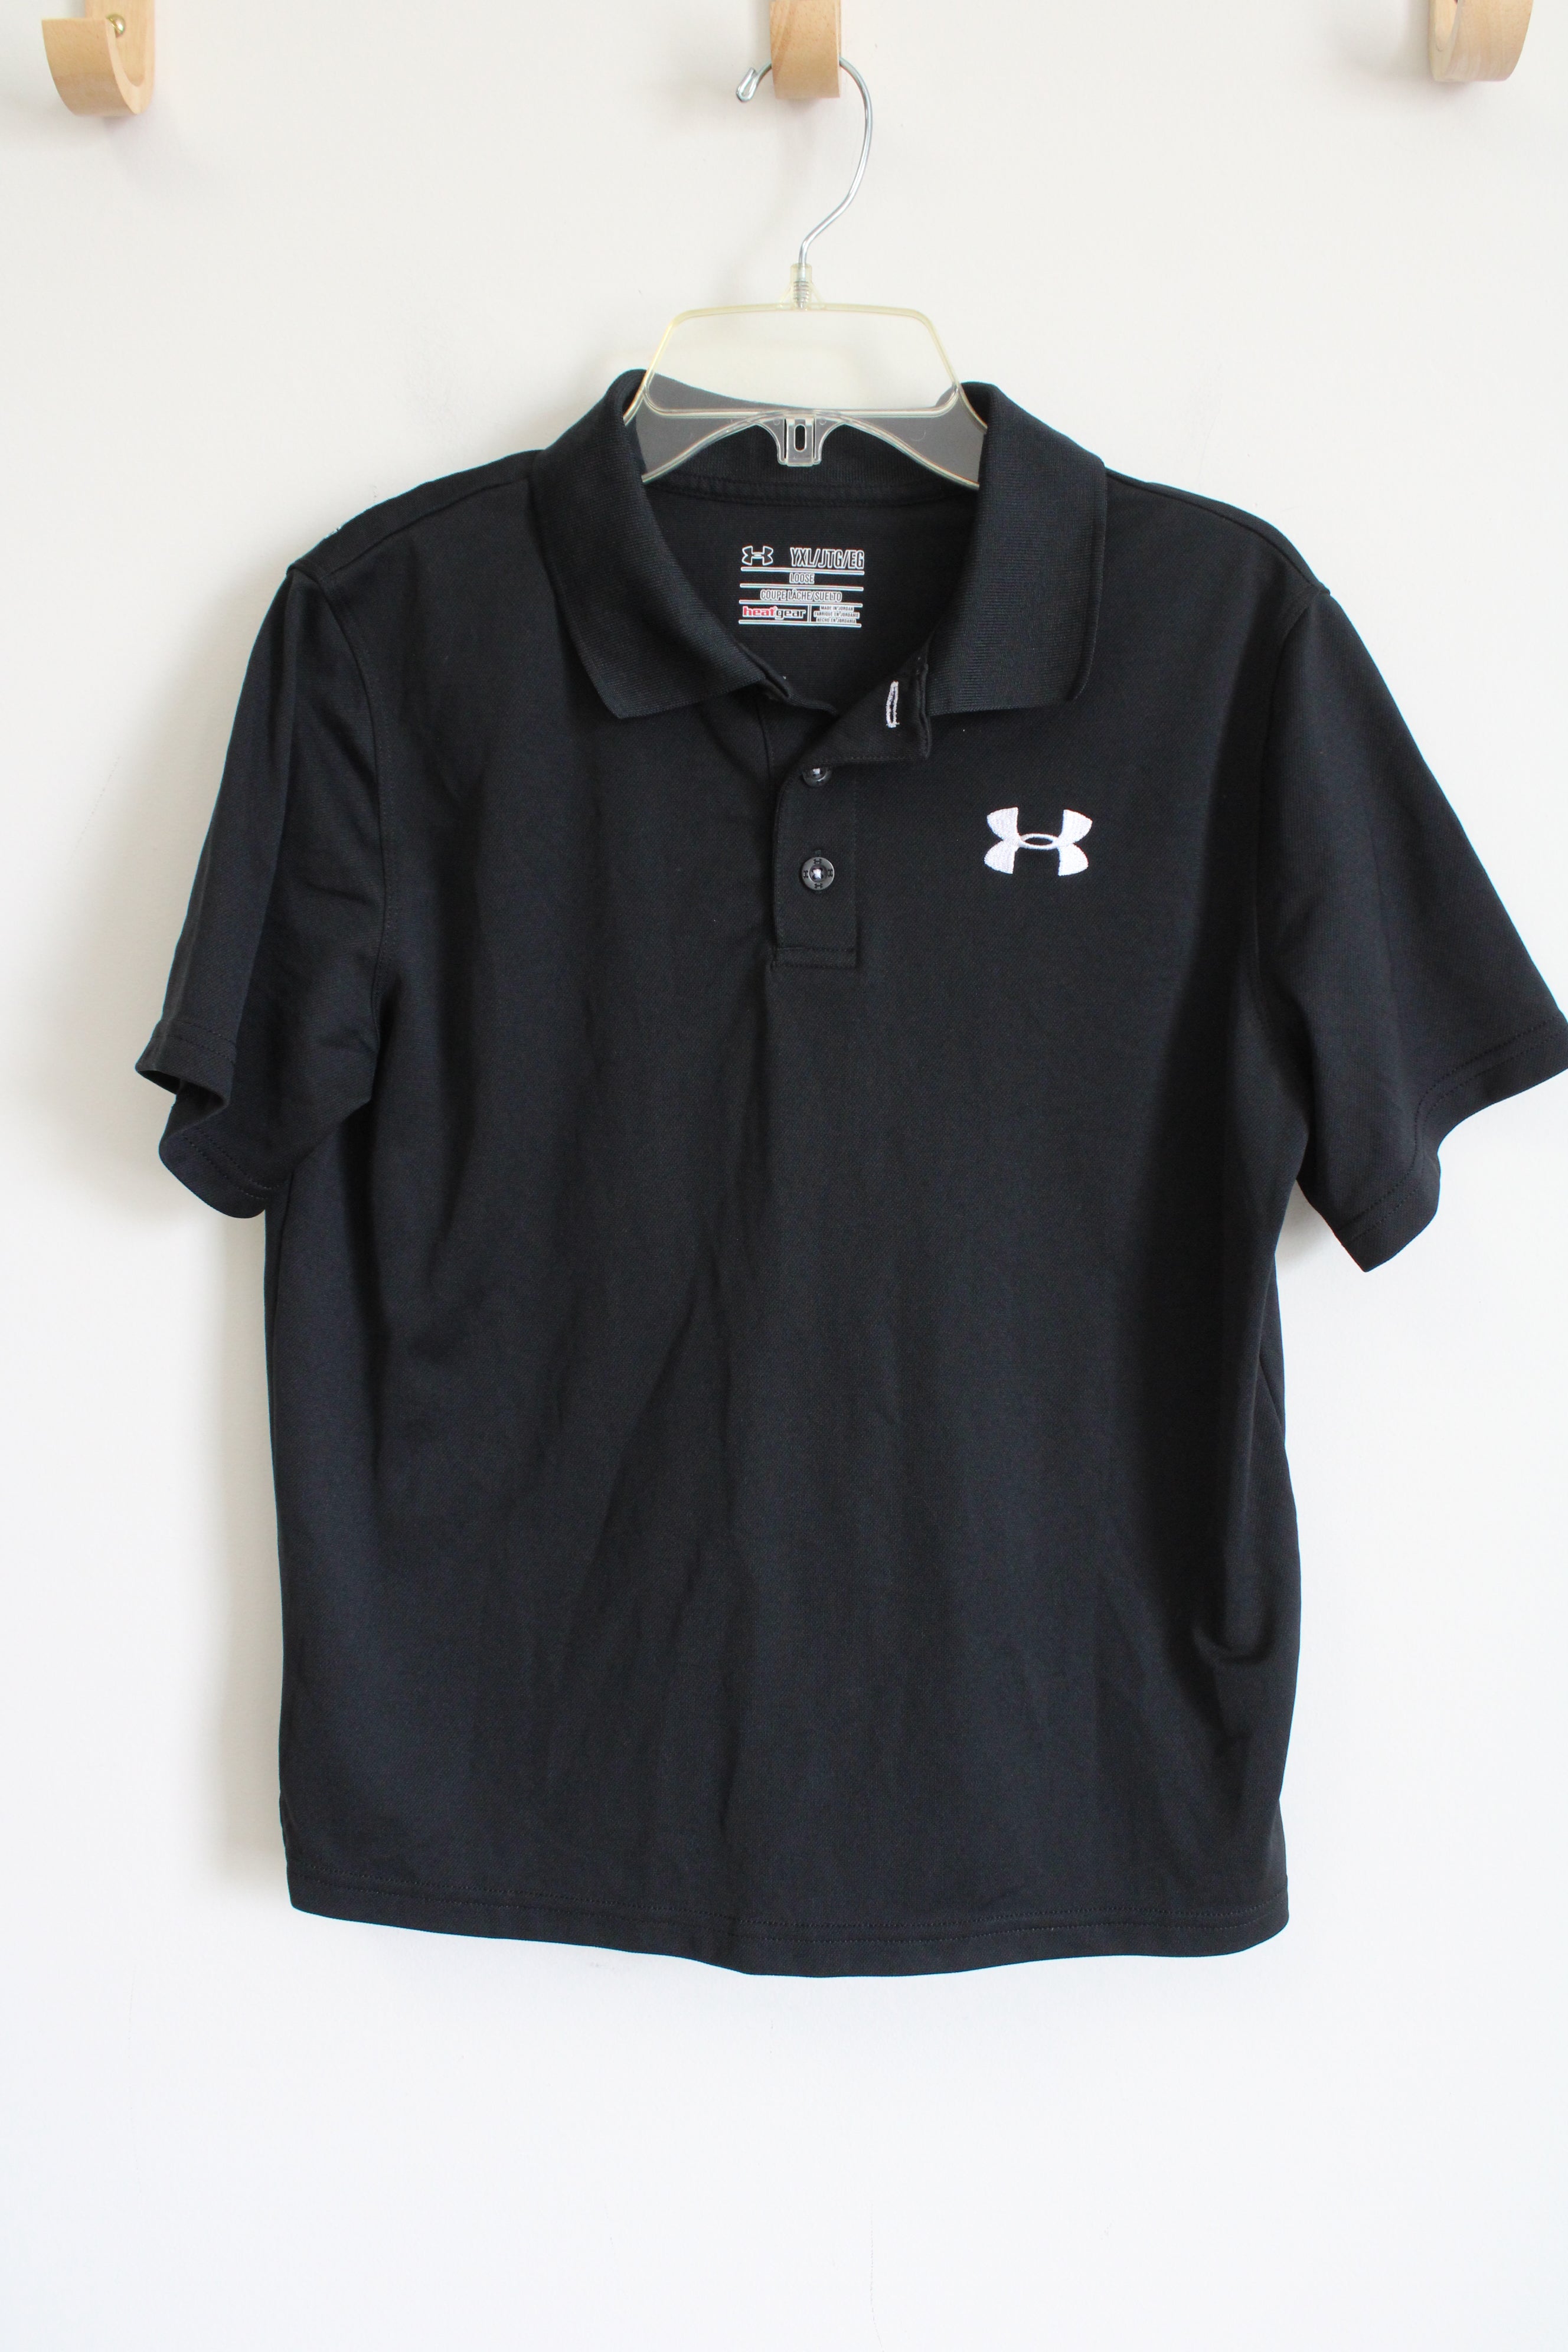 Under Armour Black Polo | Youth XL (18/20)